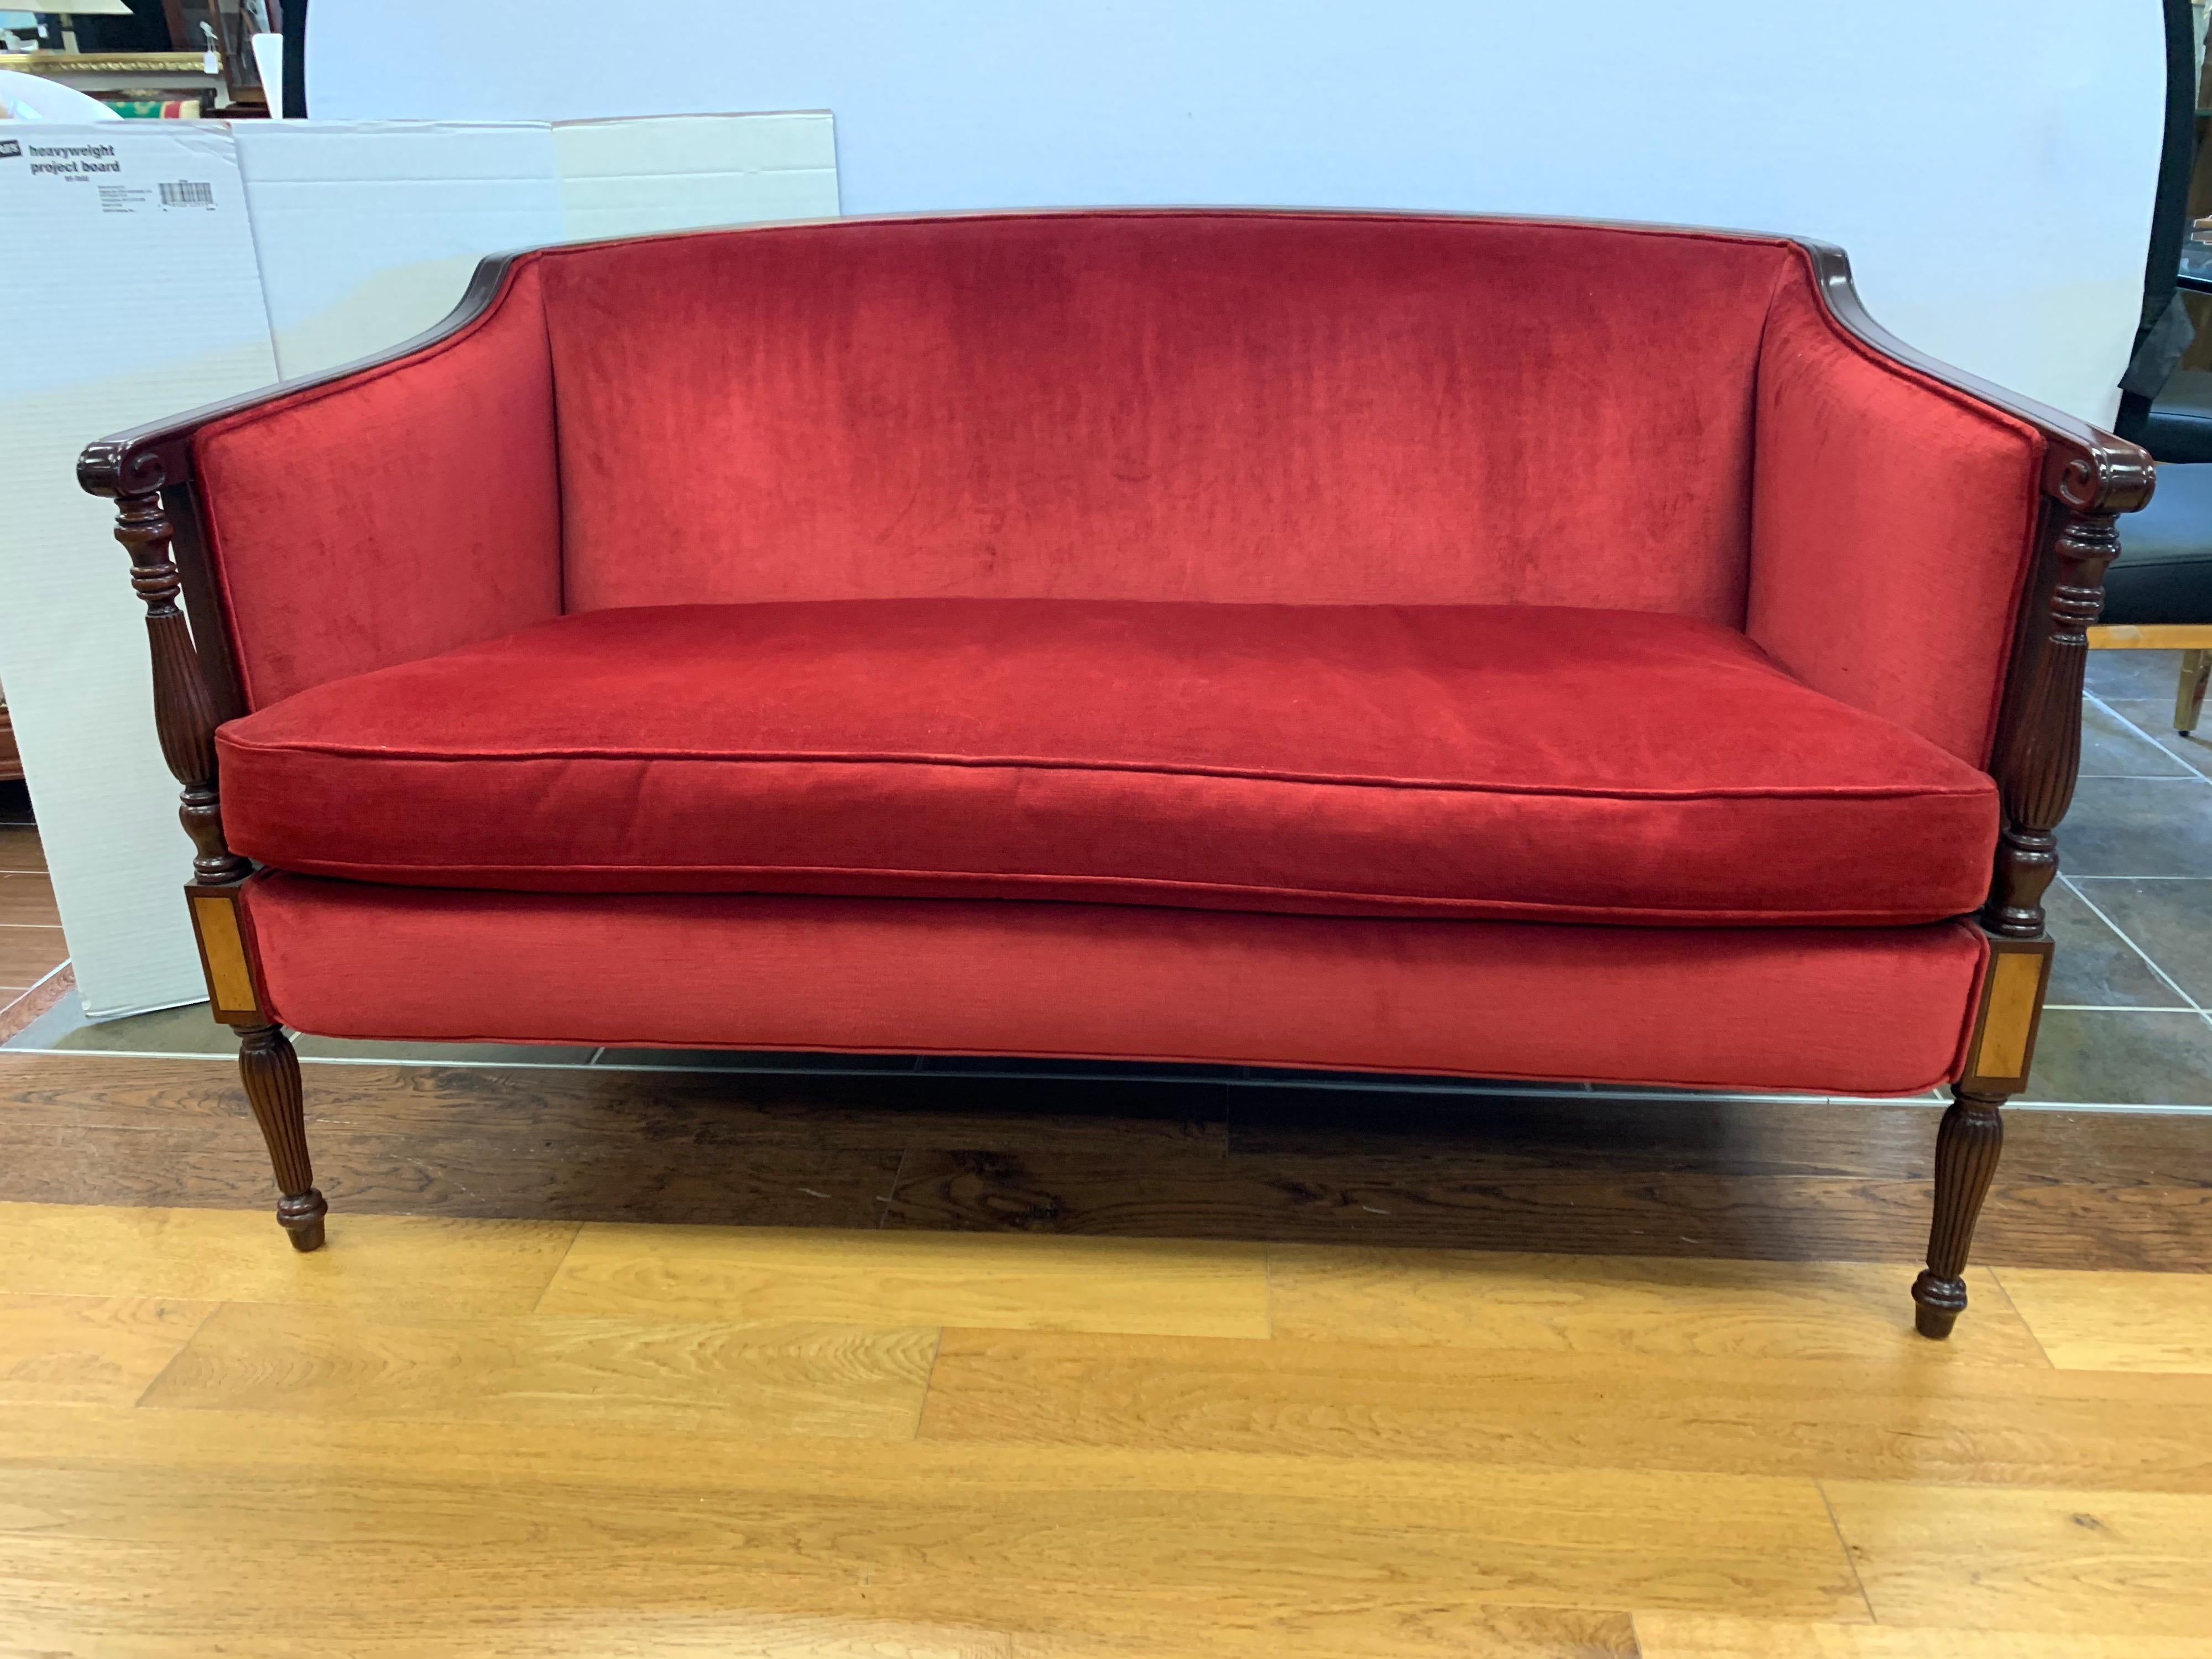 Elegant red velvet and mahogany settee loveseat with gorgeous sculptural inlay. Just the right scale.
Handmade in Hickory, North Carolina, USA with eight way hand tied construction throughout. Manufacturer is Southwood. Rarely sat in and